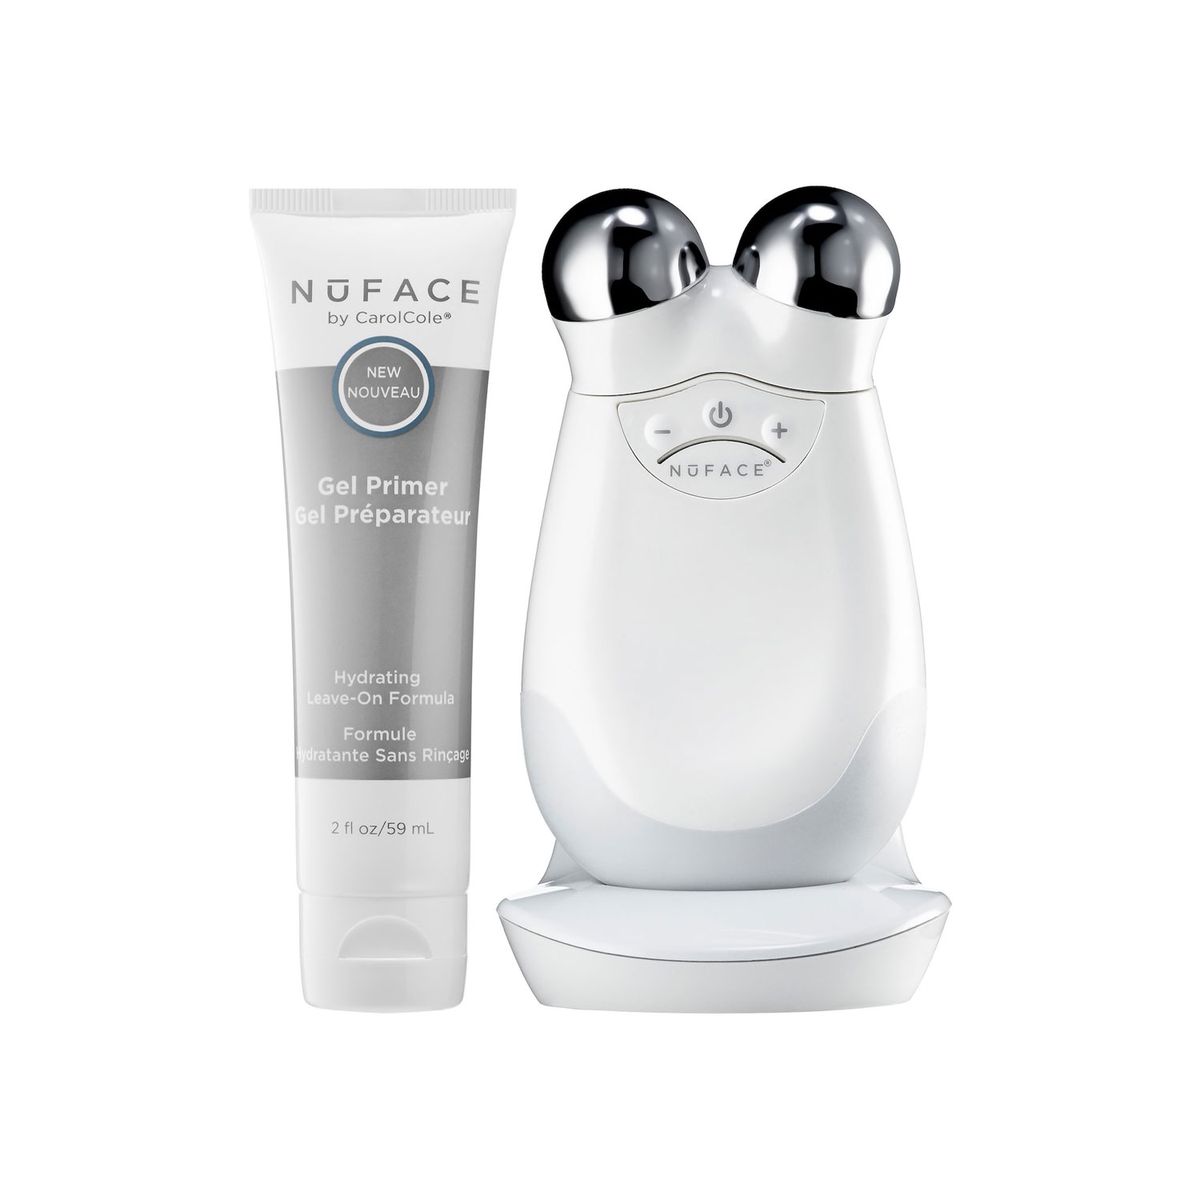 A tube gel primer and a NuFace toning device